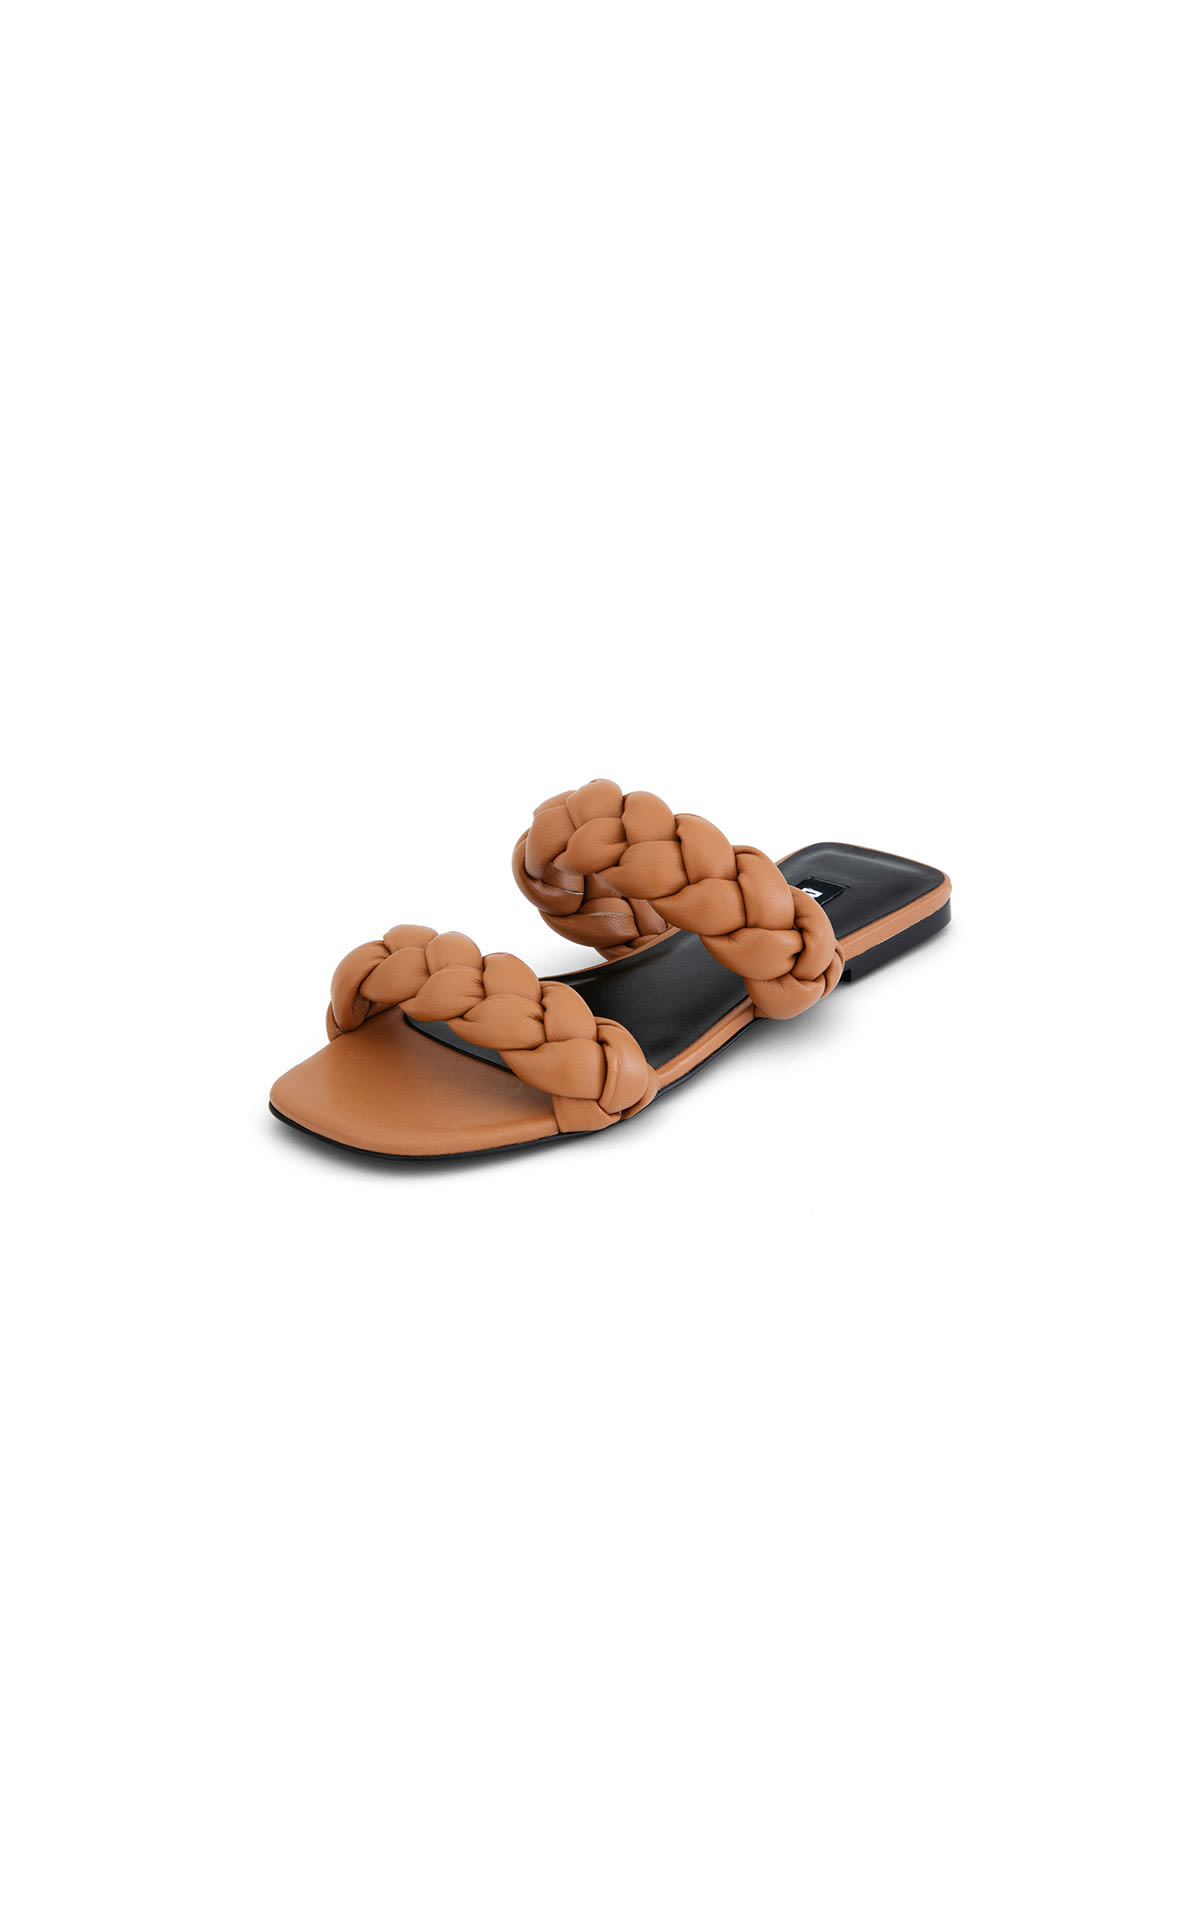 DKNY Braided double strap sandal from Bicester Village